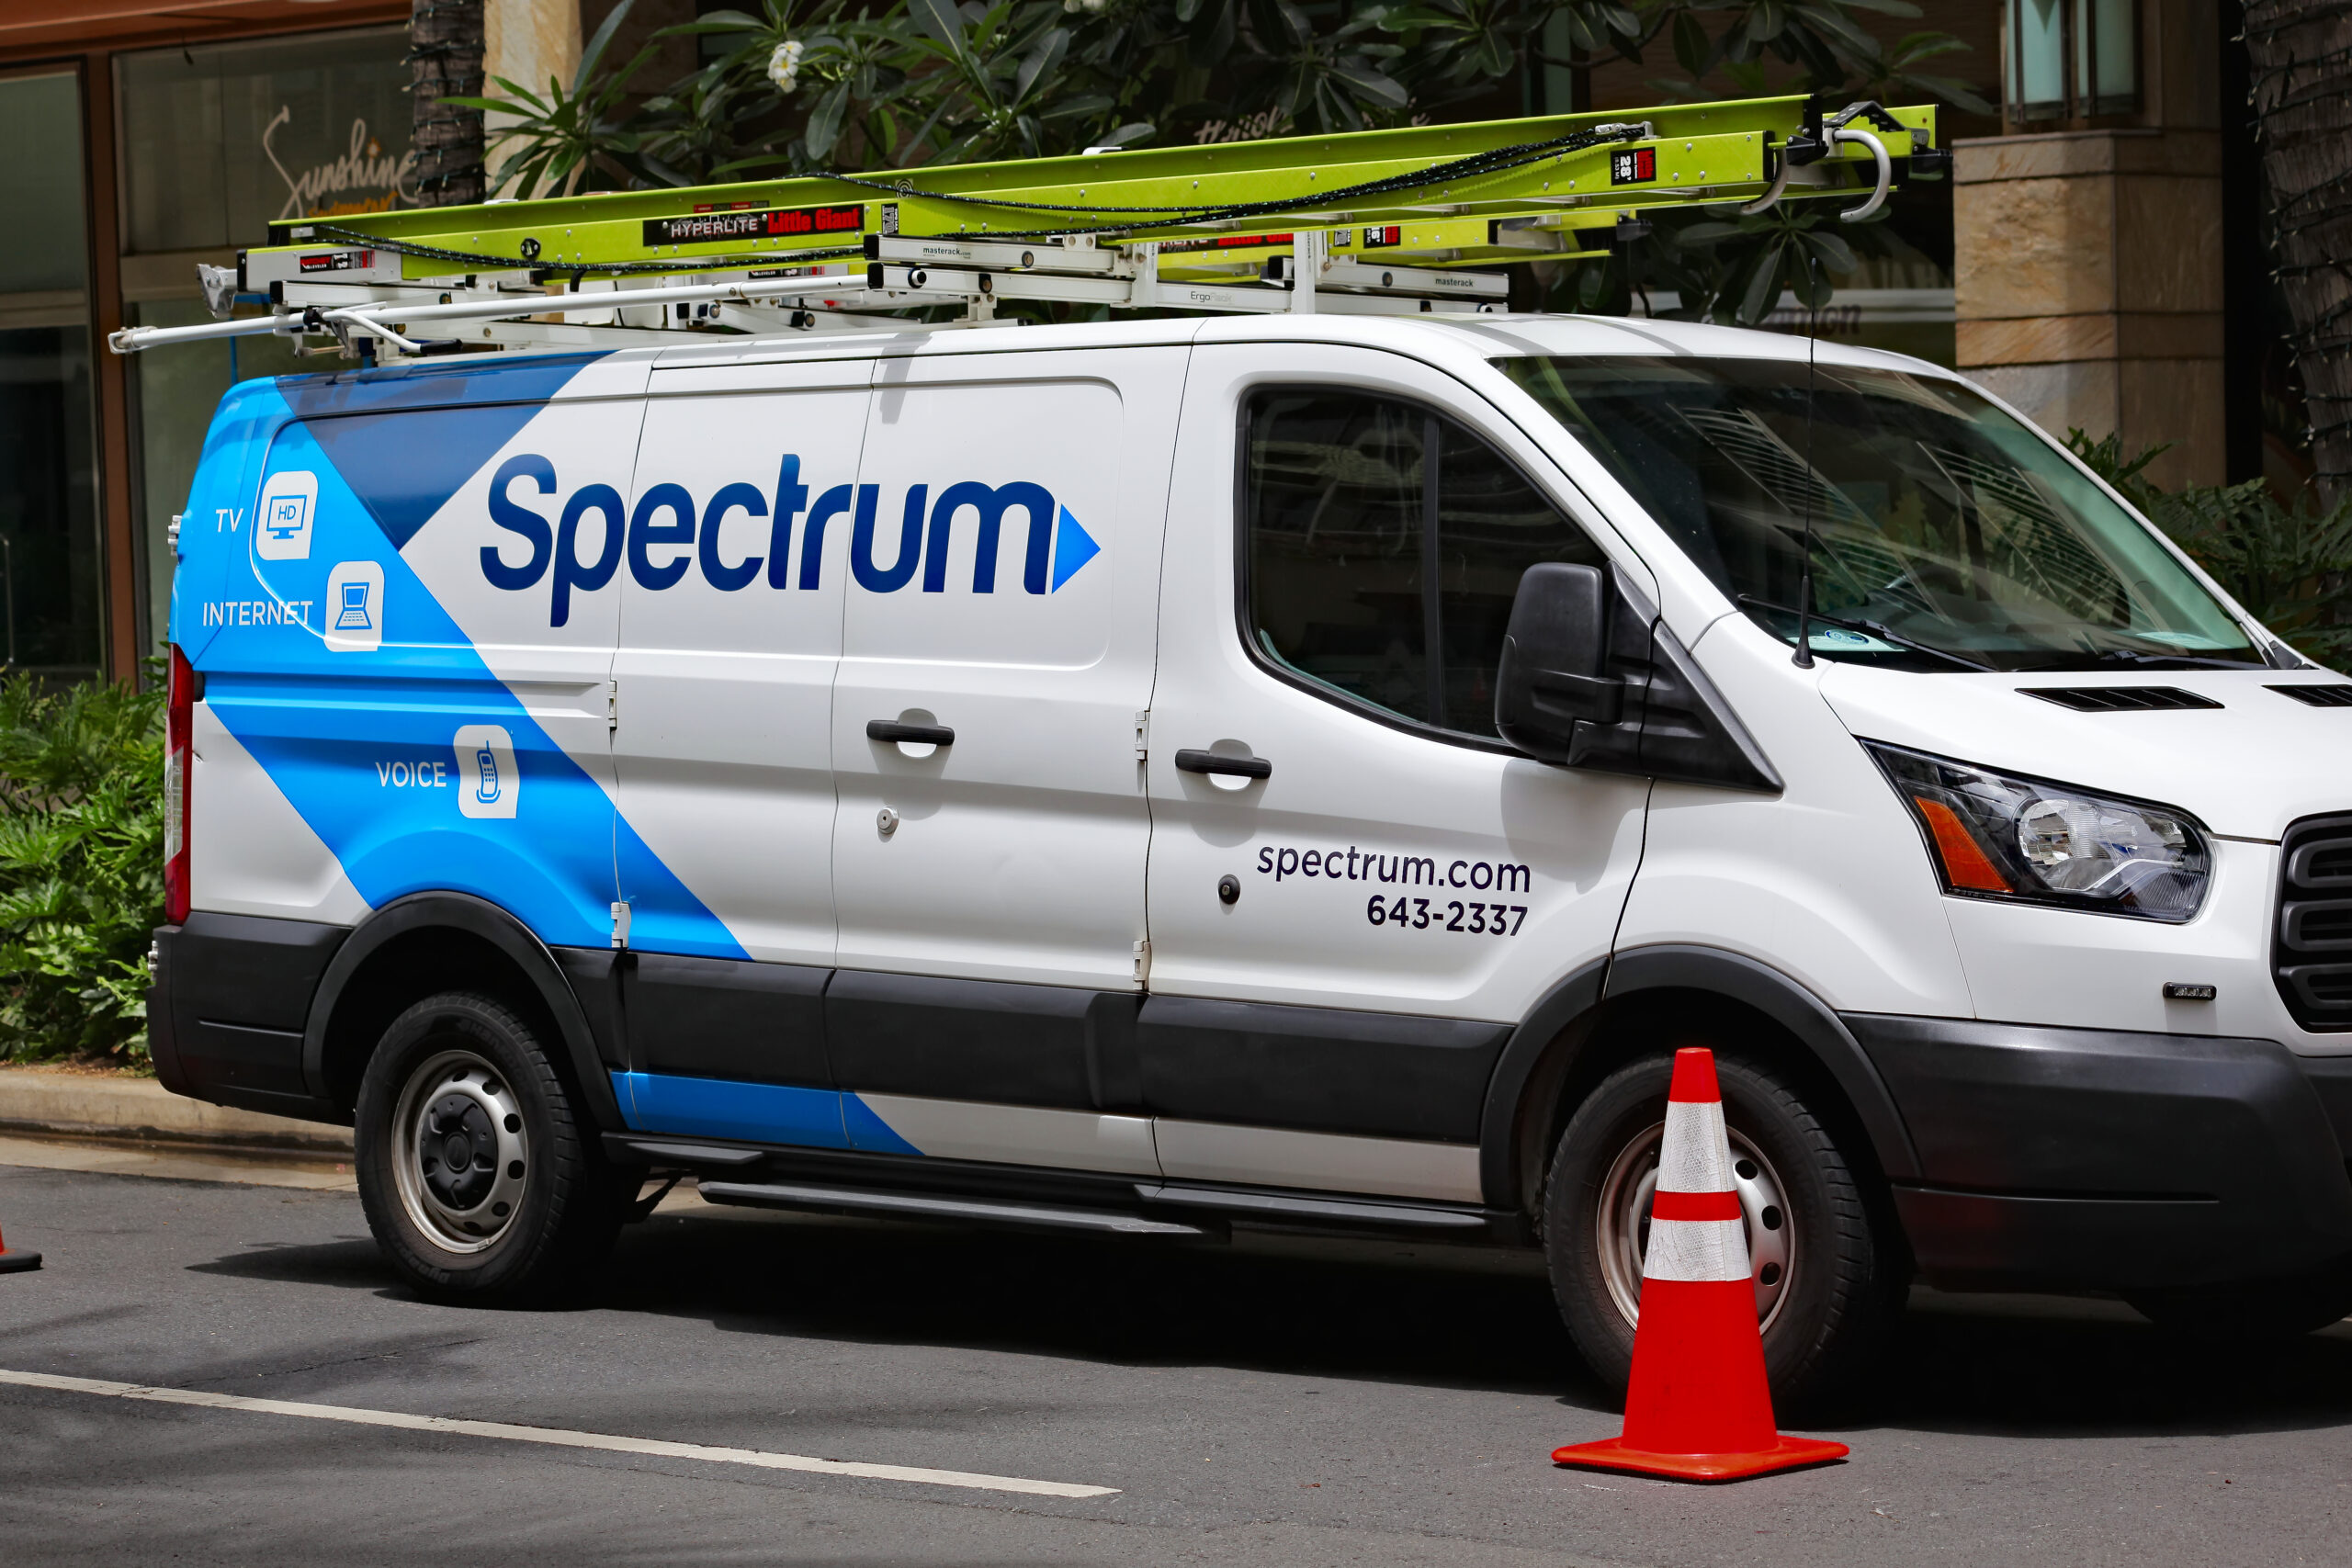 Comcast, Spectrum, & Other Cable TV Companies Lost Over 1.7 Million Subscribers In Just 3 Months